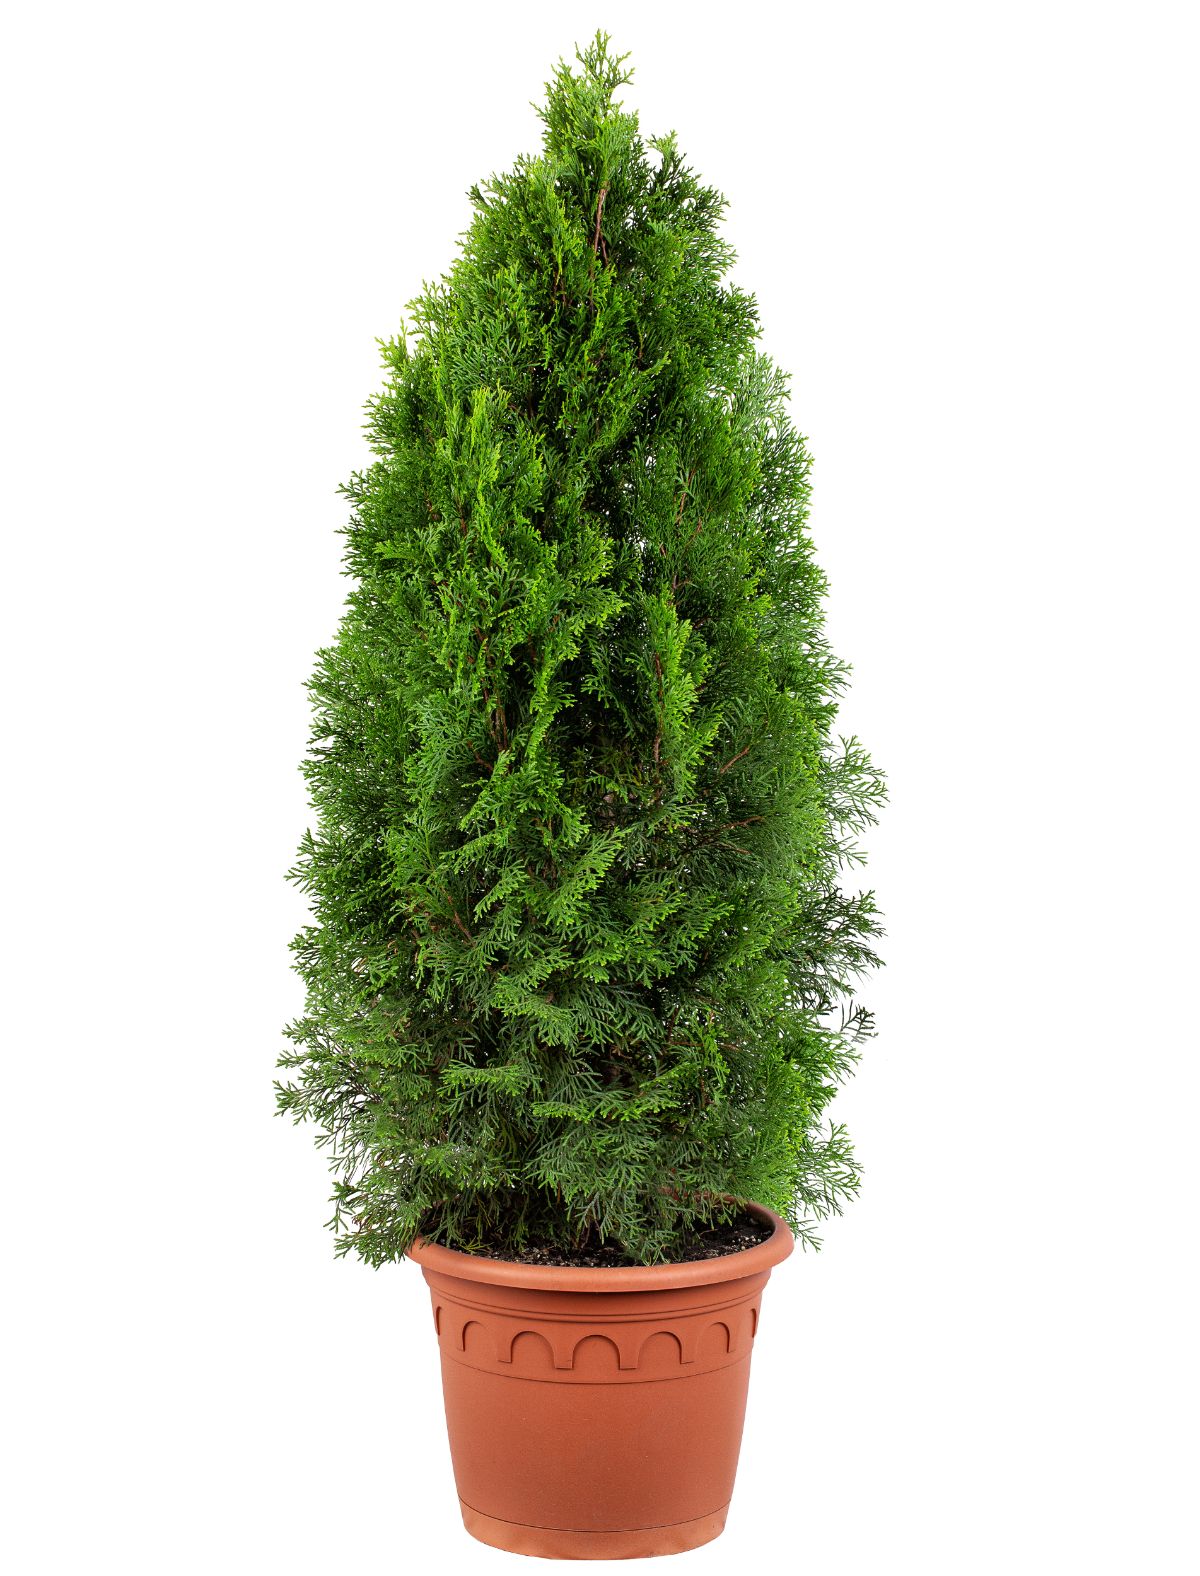 A cone-shaped cypress topiary in a pot